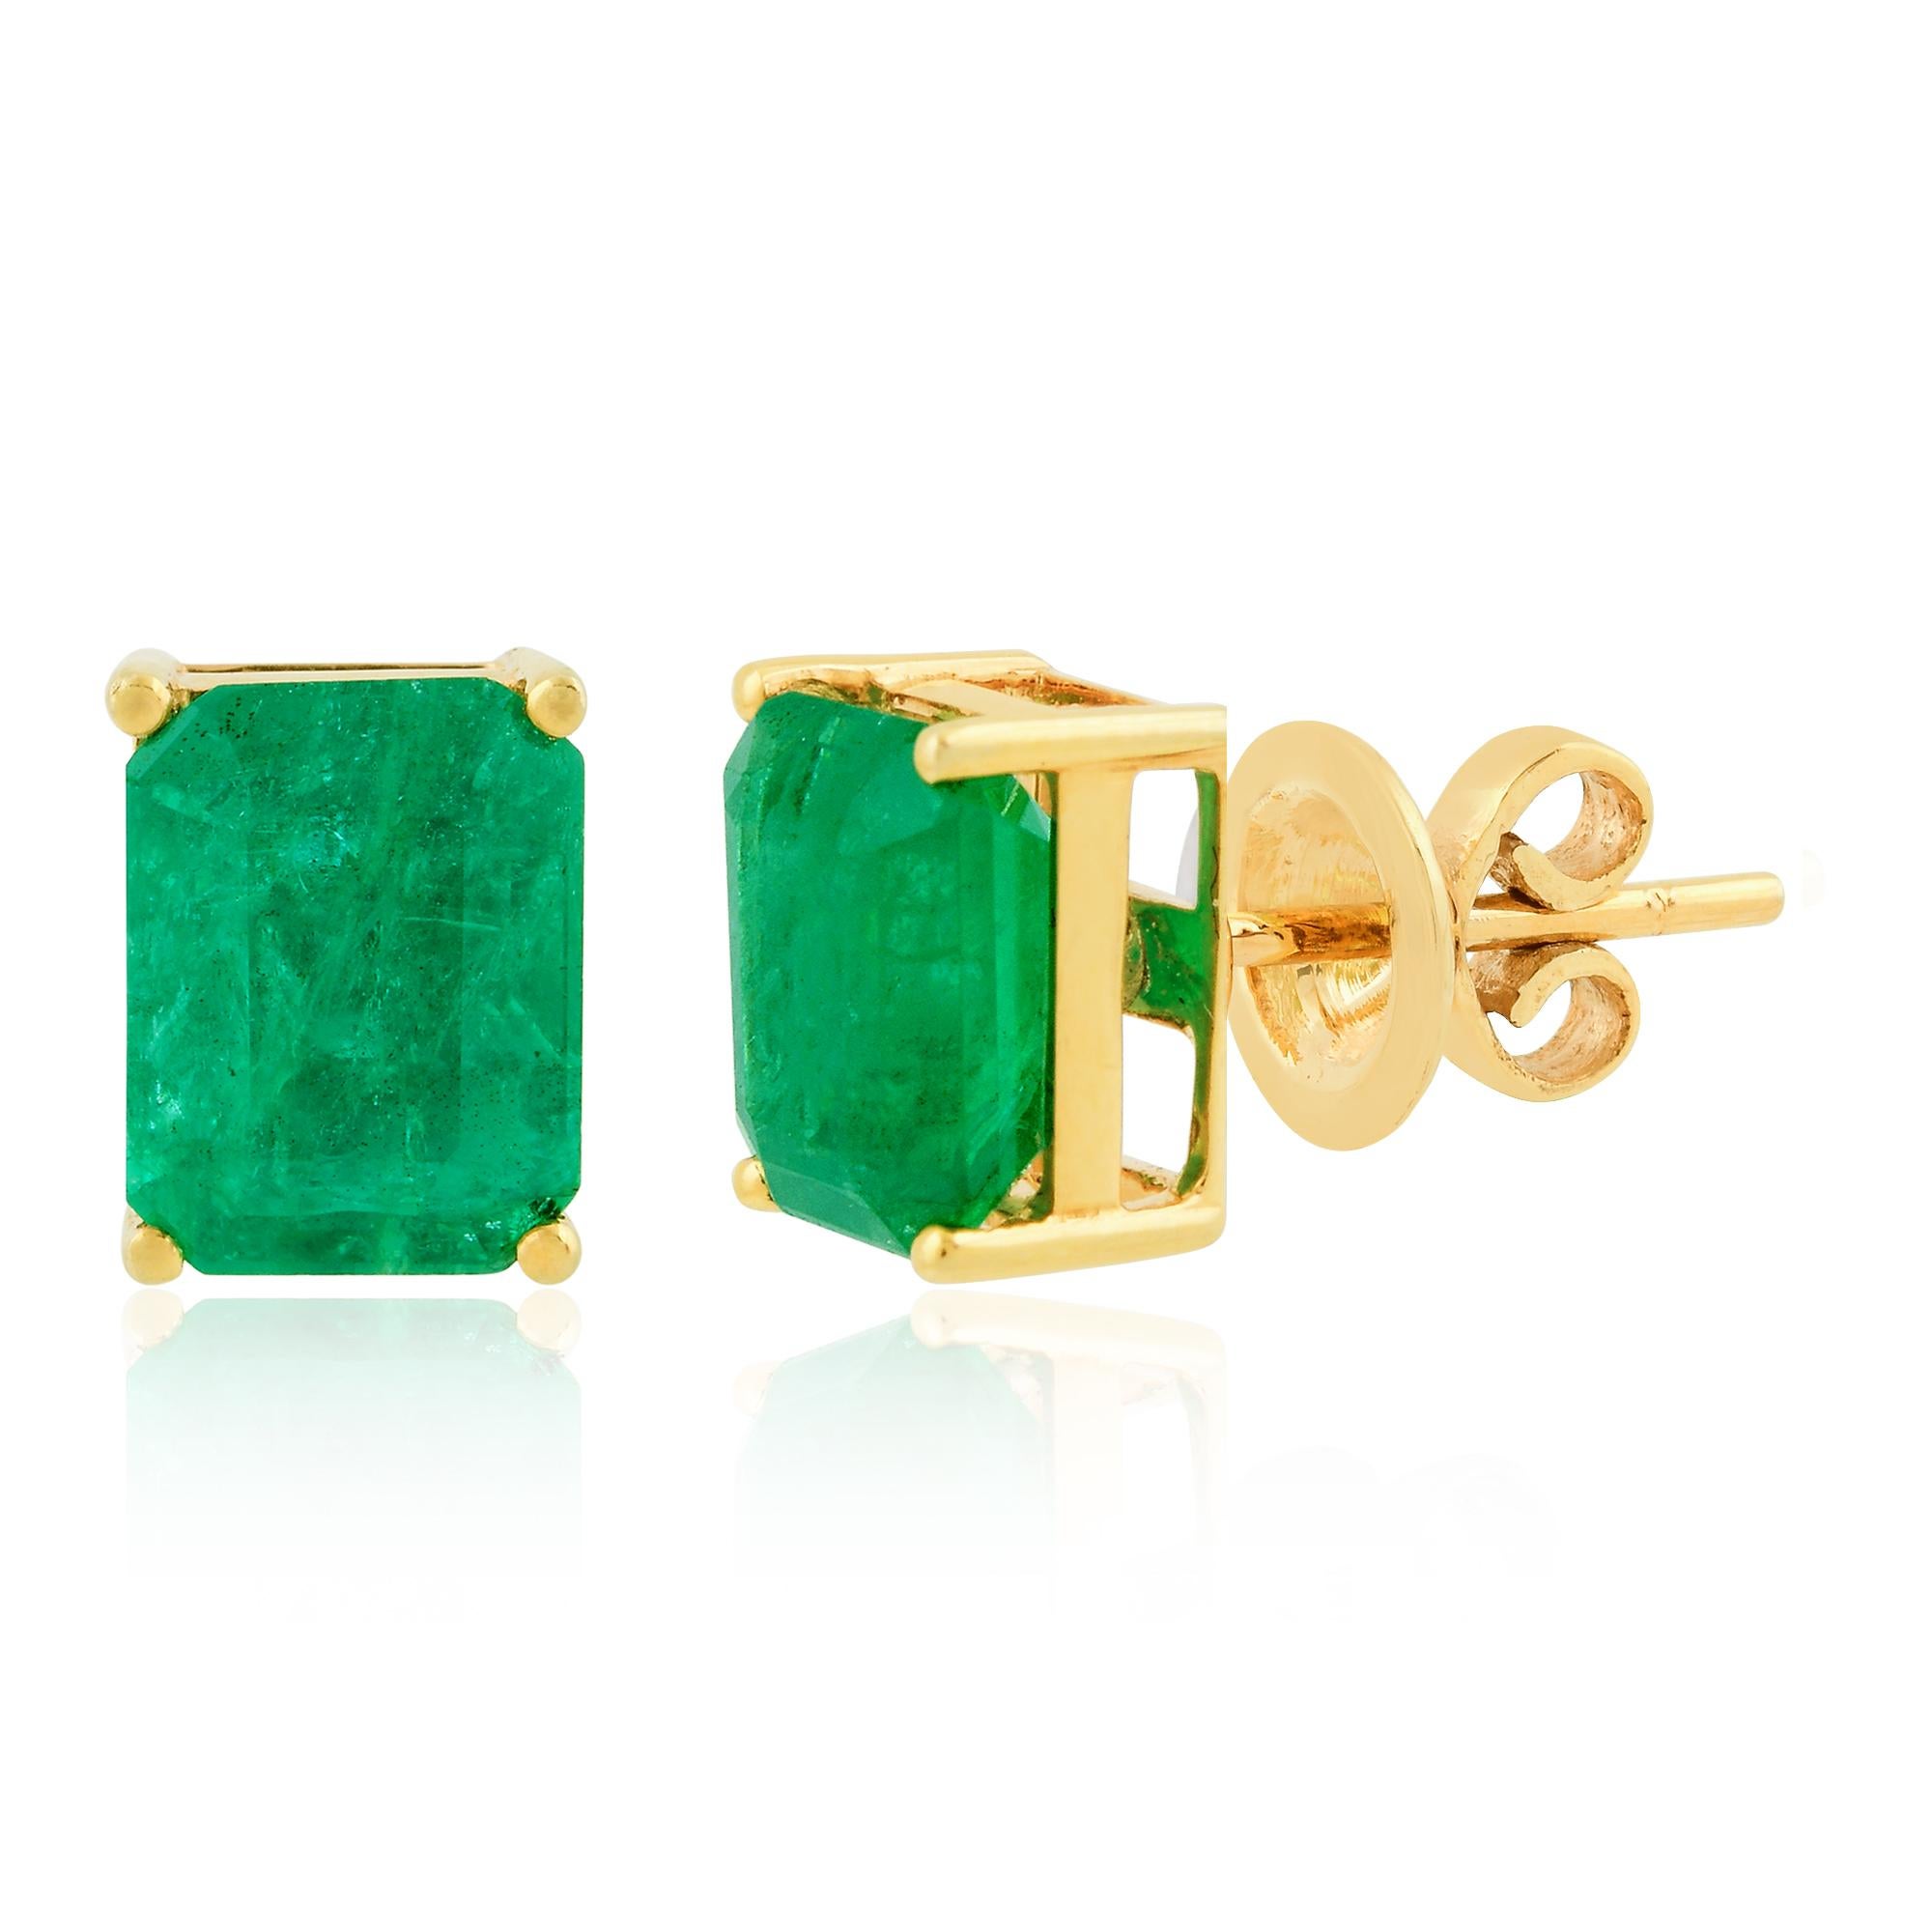 Item Code :- CN-31734
Gross Weight :- 2.58 gm
18k Solid Yellow Gold Weight :- 1.78 gm
Emerald Weight :- 4 Carat
Earrings Size :- 8.26x6.01 mm approx.

✦ Sizing
.....................
We can adjust most items to fit your sizing preferences. Most items